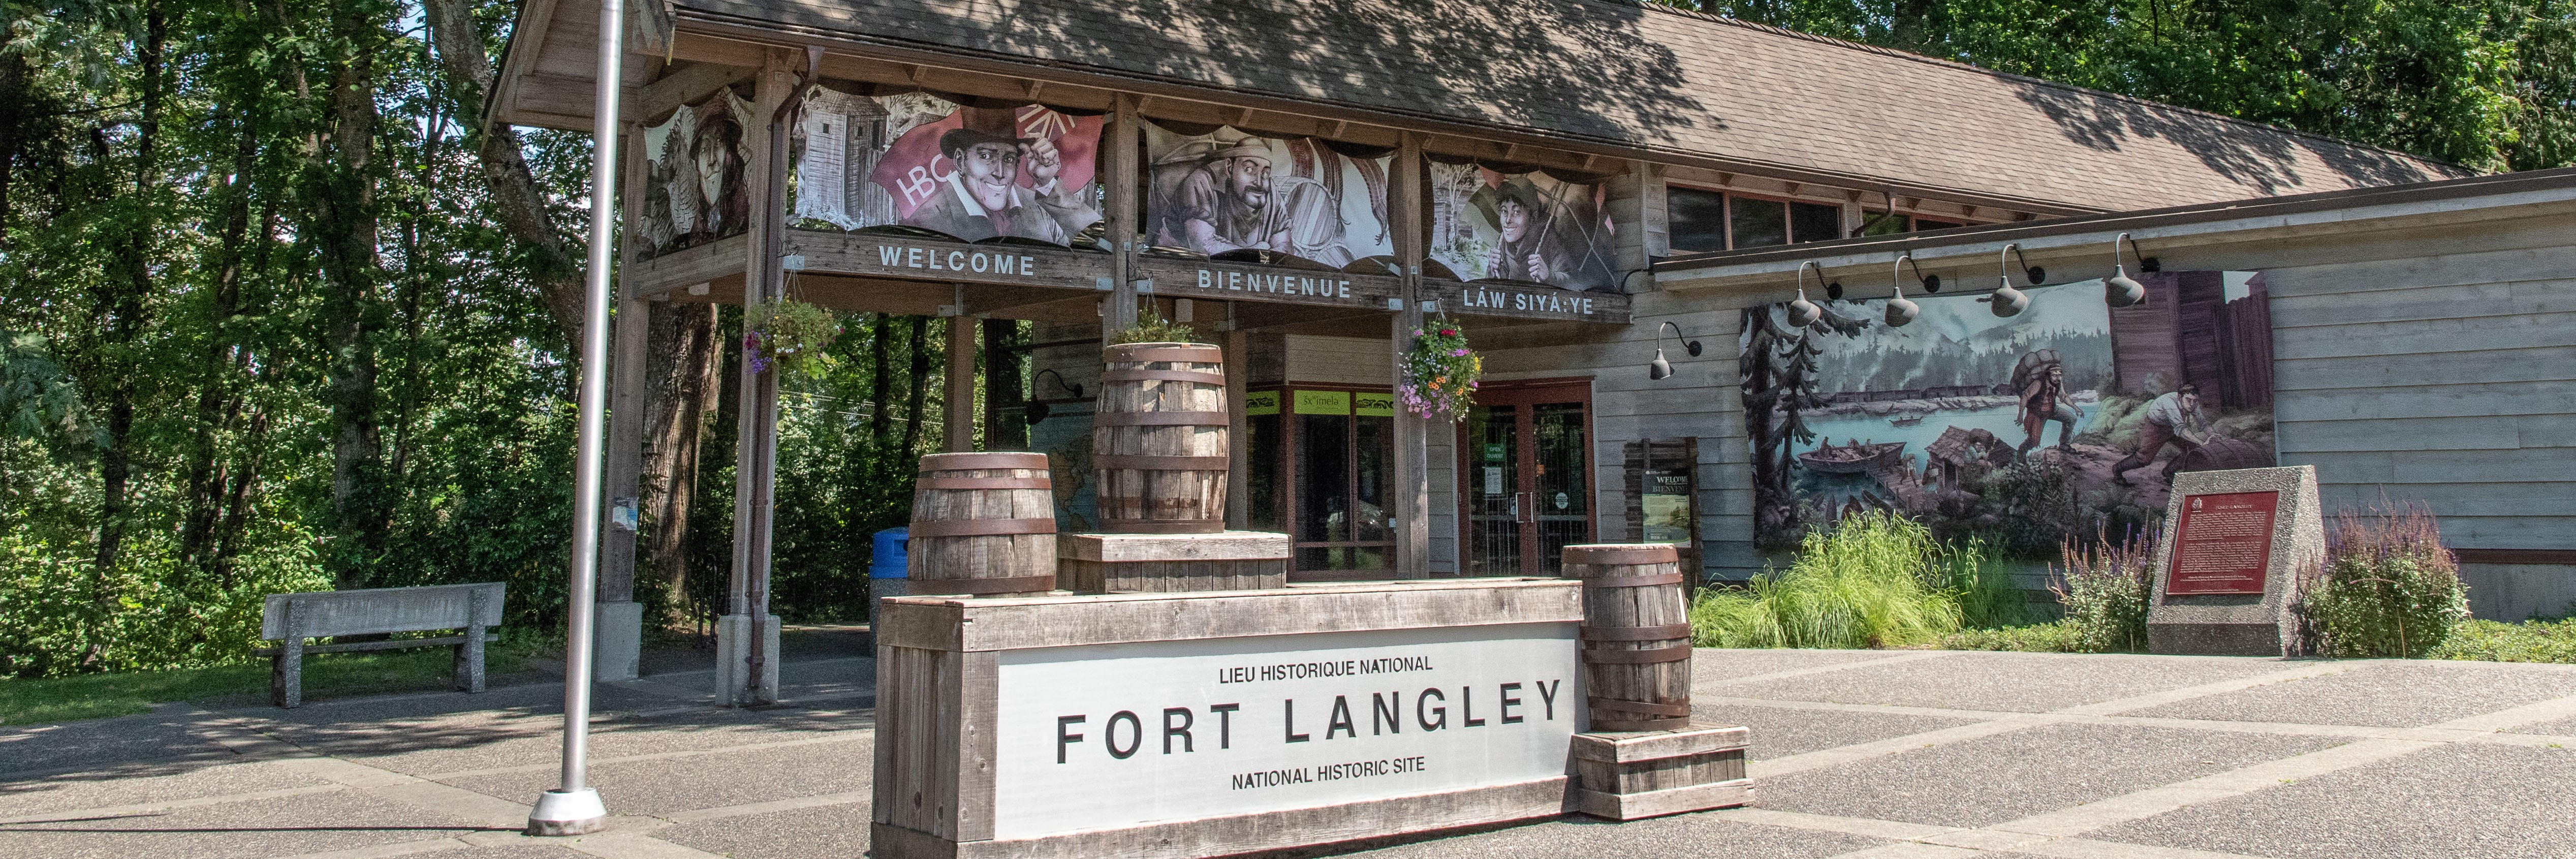 The entrance to Fort Langley National Historic Site via the visitor center.